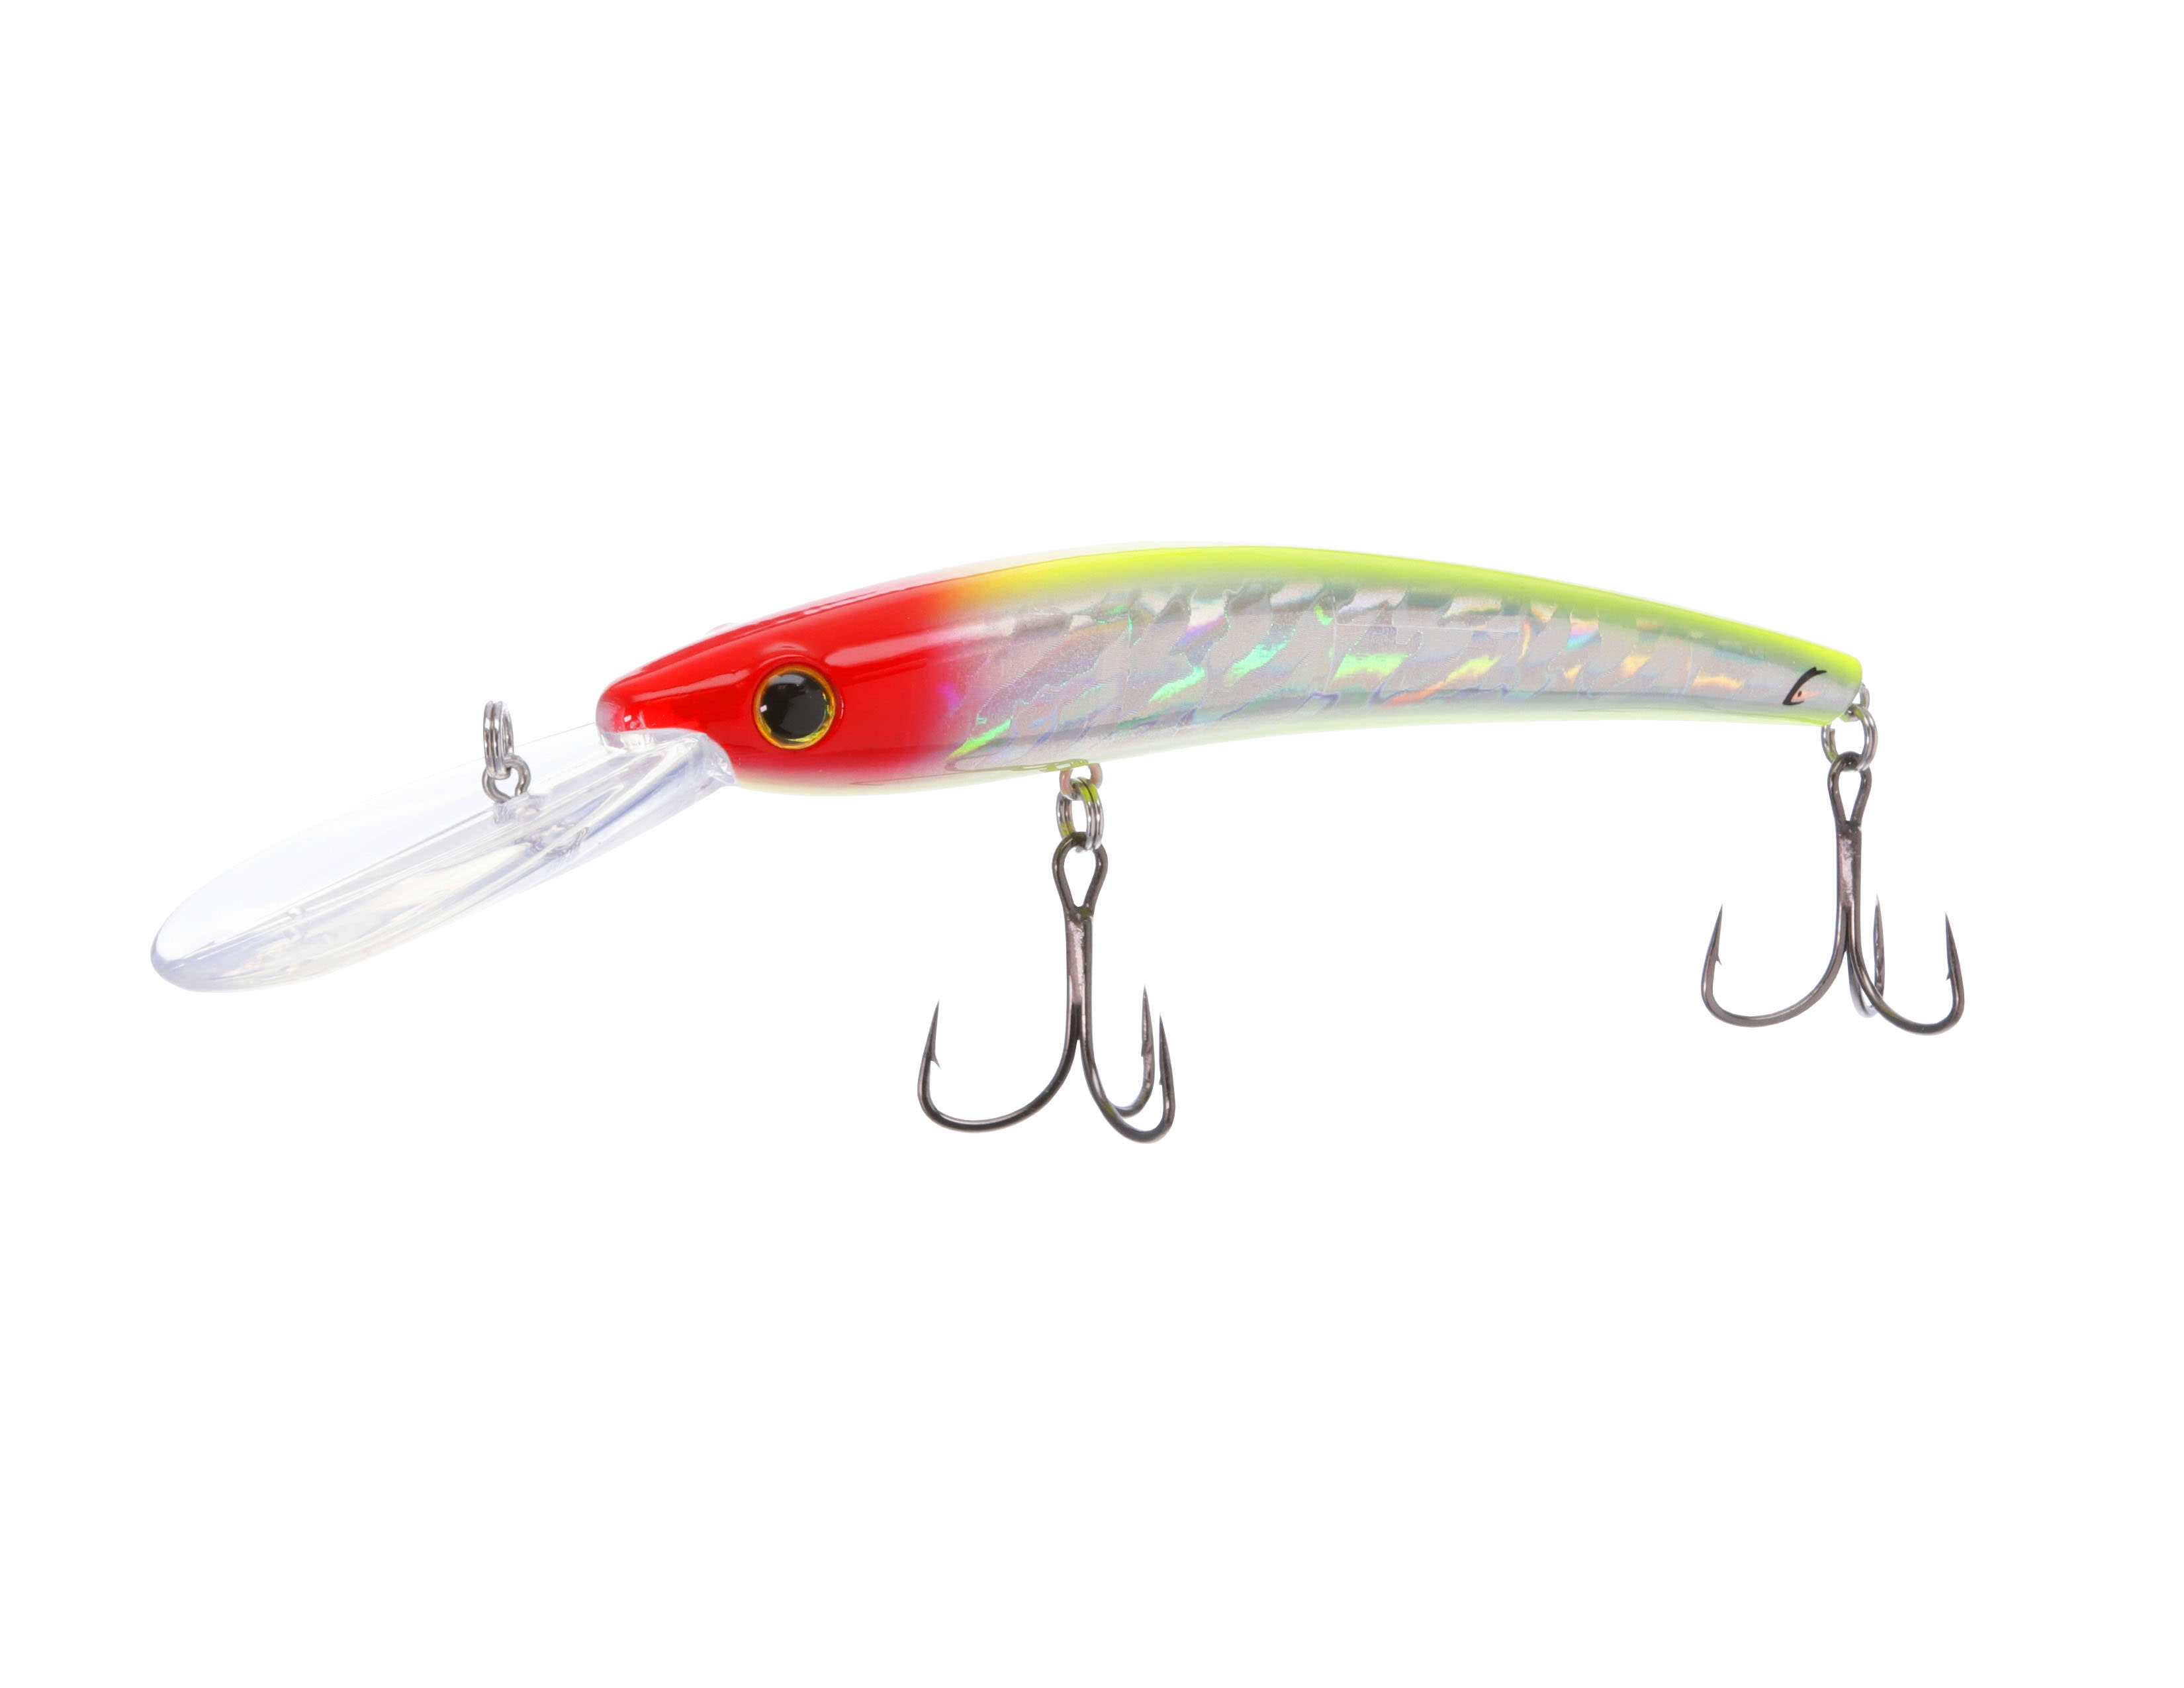 The Reef Runner Deep Diver Fishing Lures